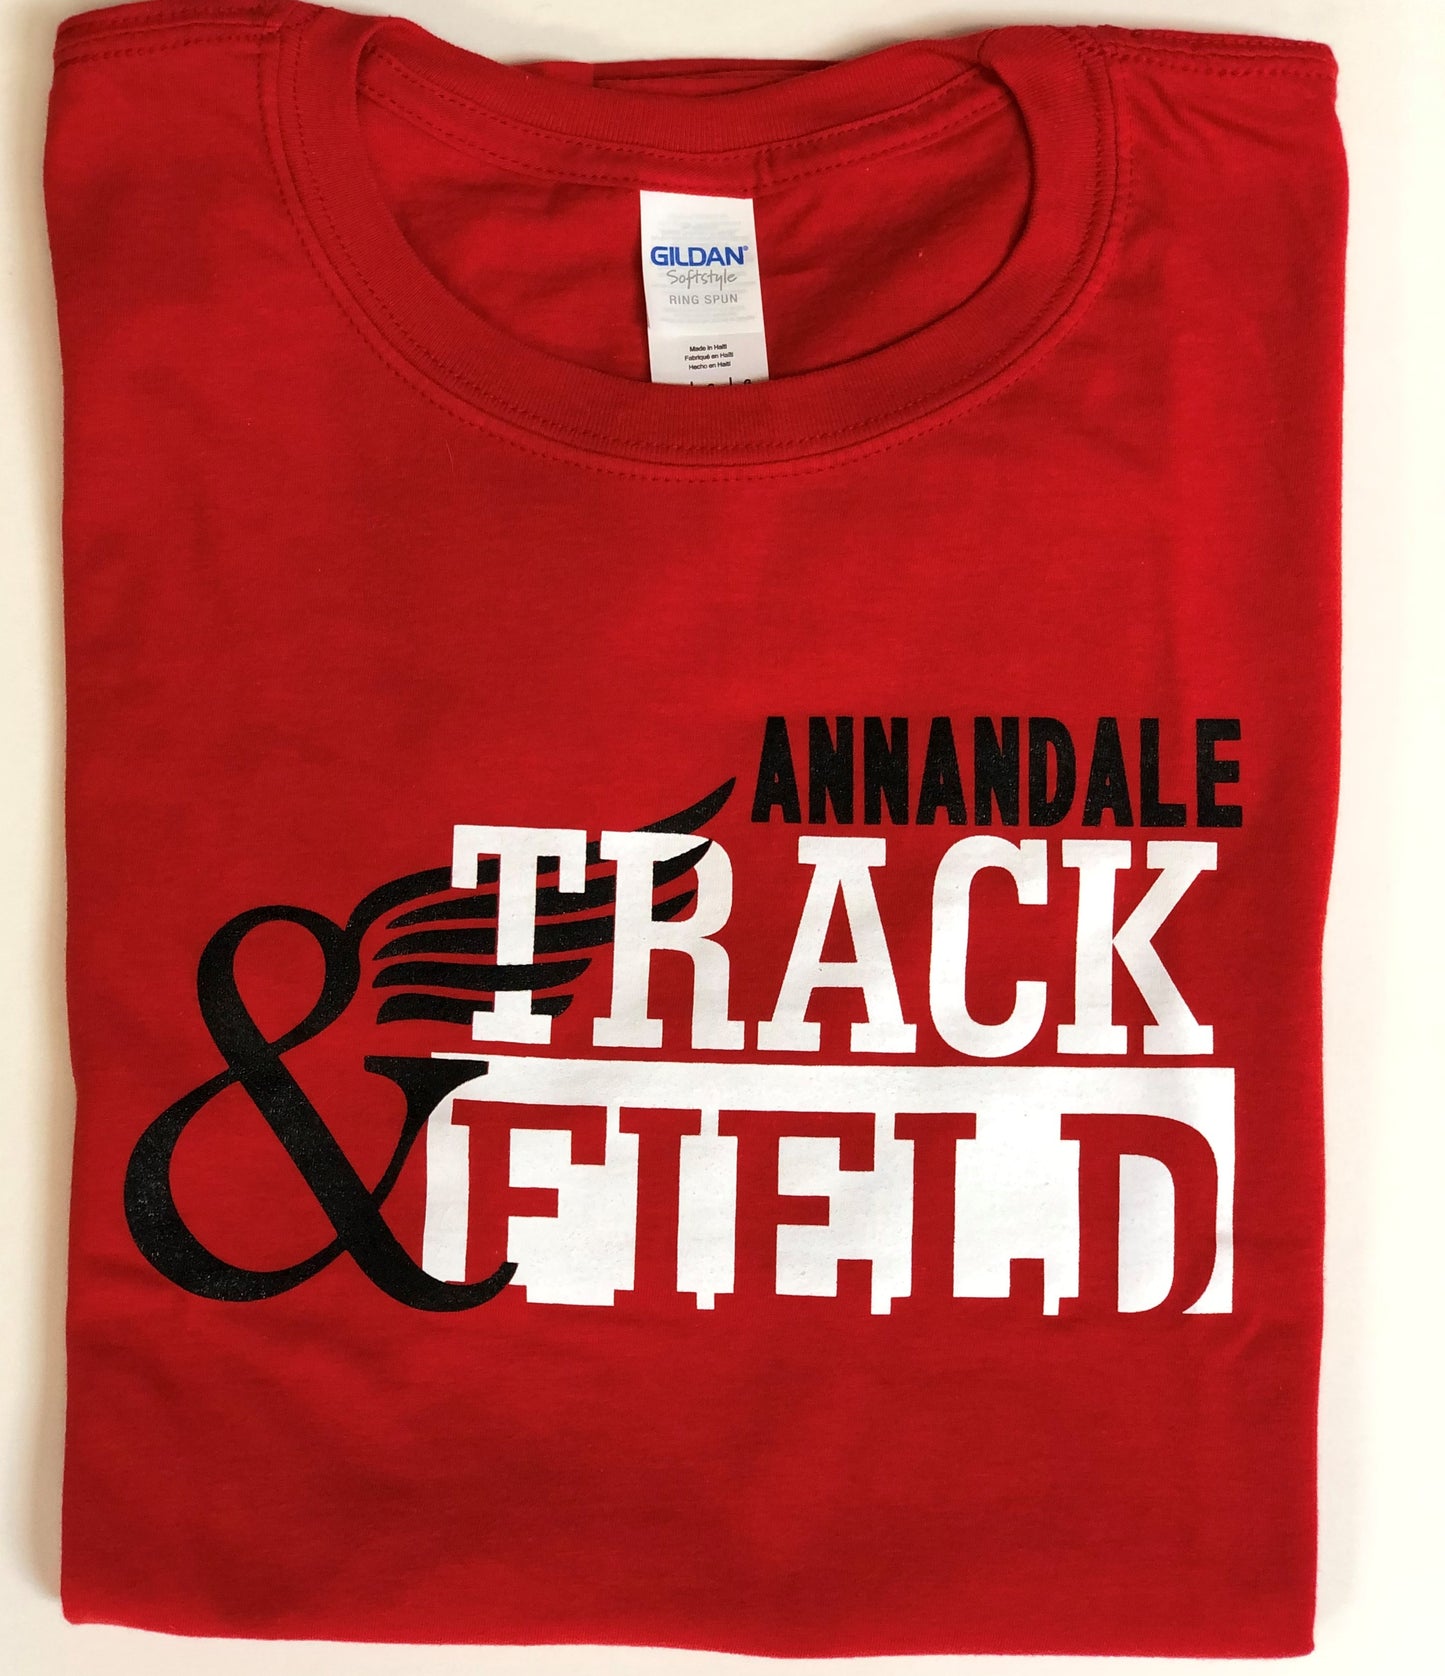 Annandale Track & Field T-shirt